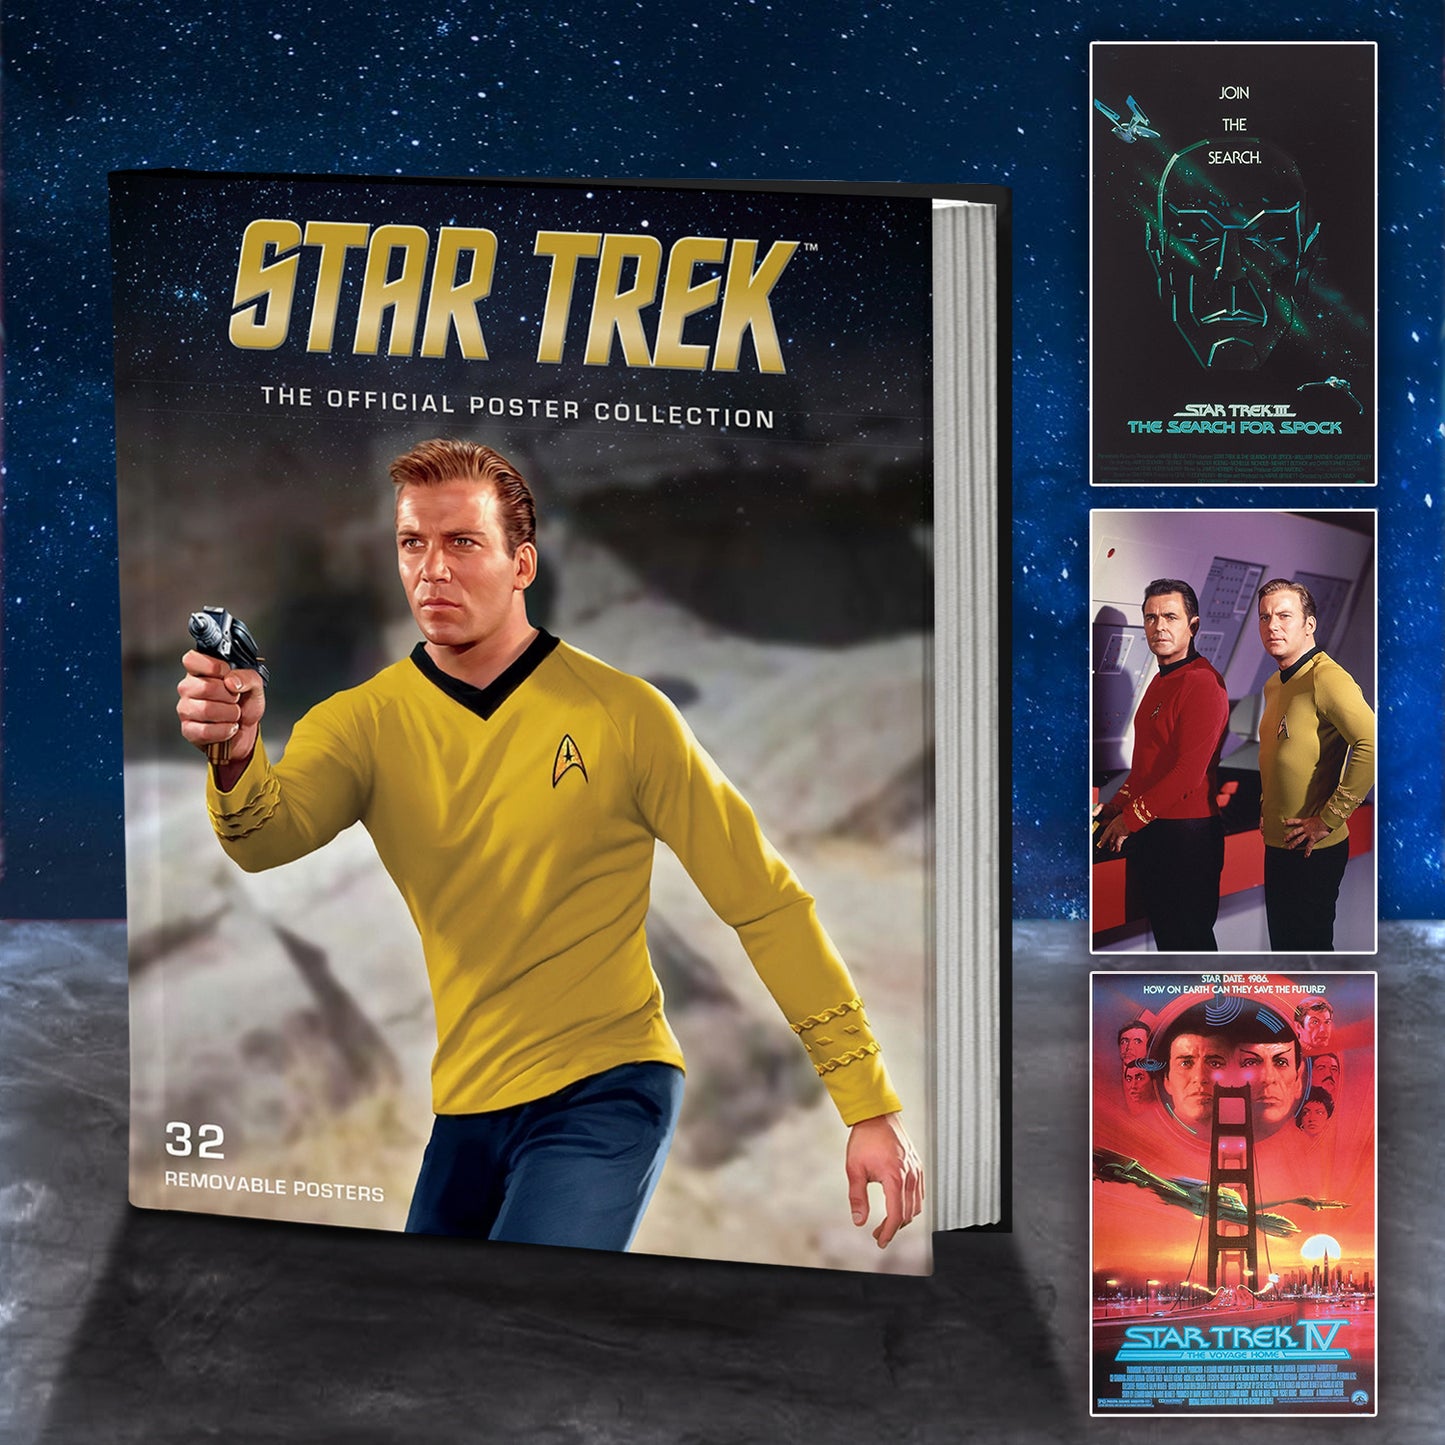 A book on  rock ledge, against the nighttime sky. On the cover is an image of Captain James T. Kirk from the original Star Trek series, in his gold command shirt and pointing a phaser. Behind him is a rock formation. At the top is a starry sky, with gold text saying "Star Trek: The official poster collection." On the right are thumbnail images of three other posters from the collection.